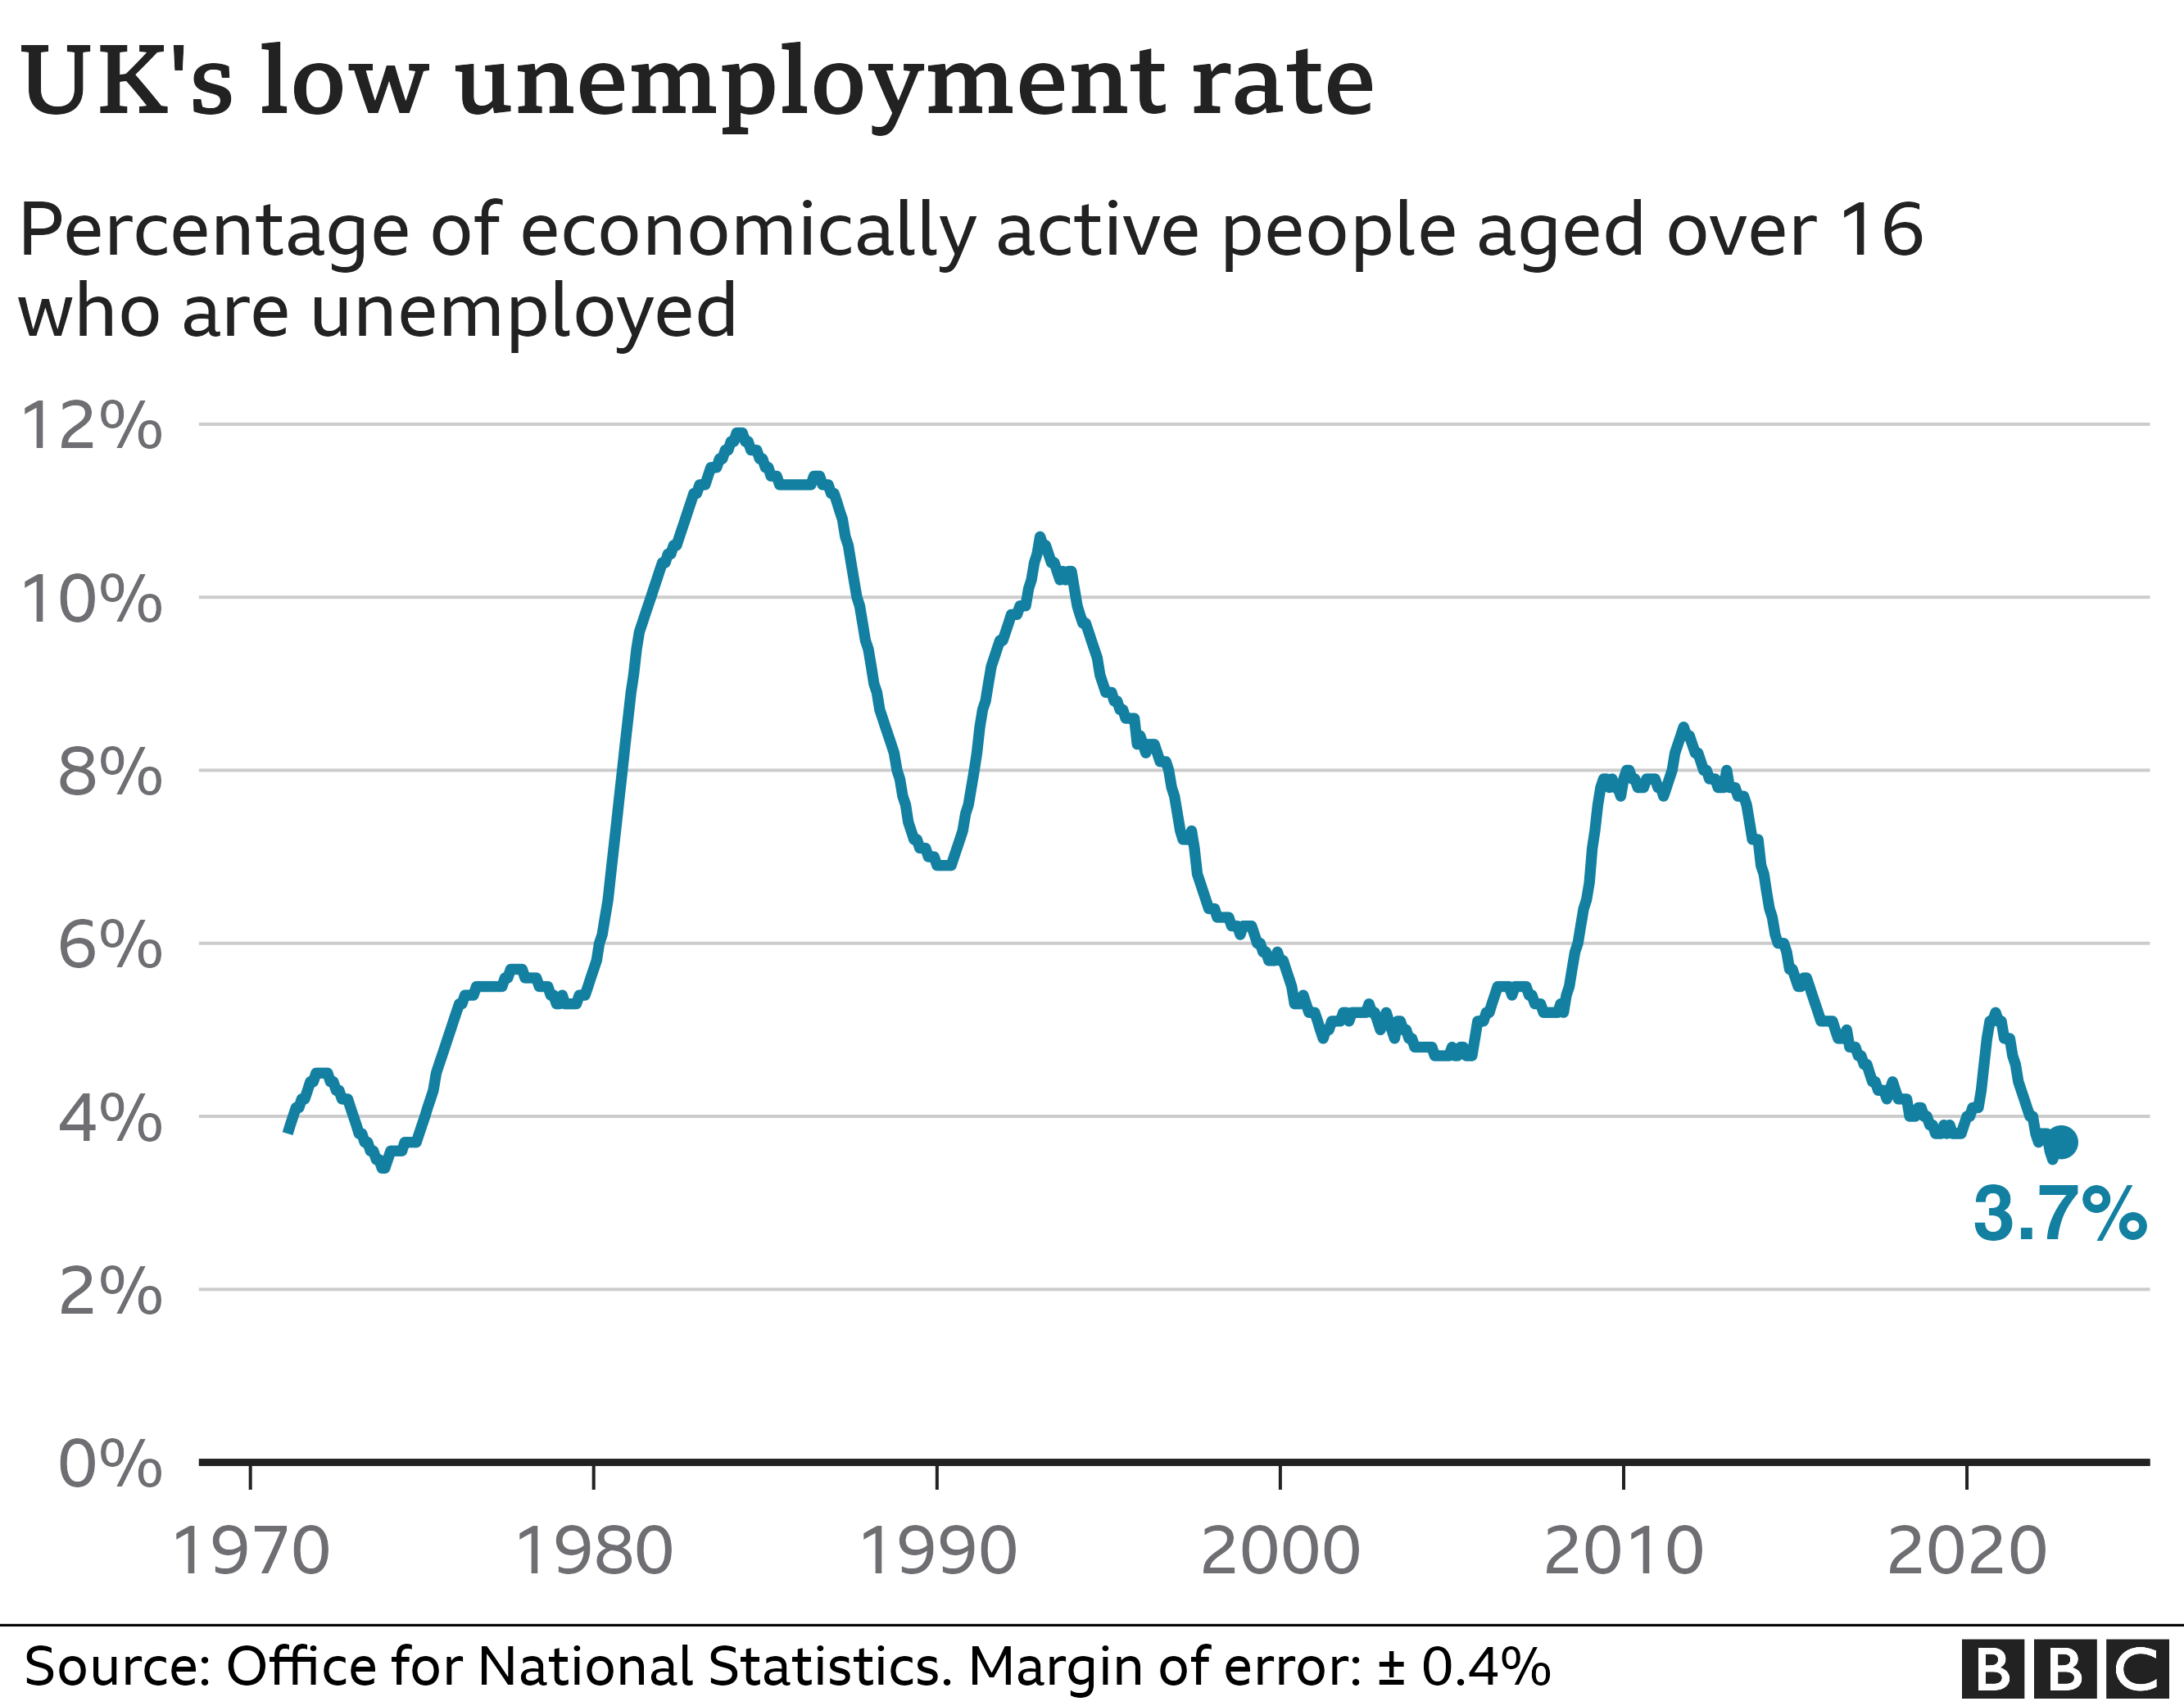 Line chart showing the UK's unemployment rate is near the lowest it's been in fifty years.